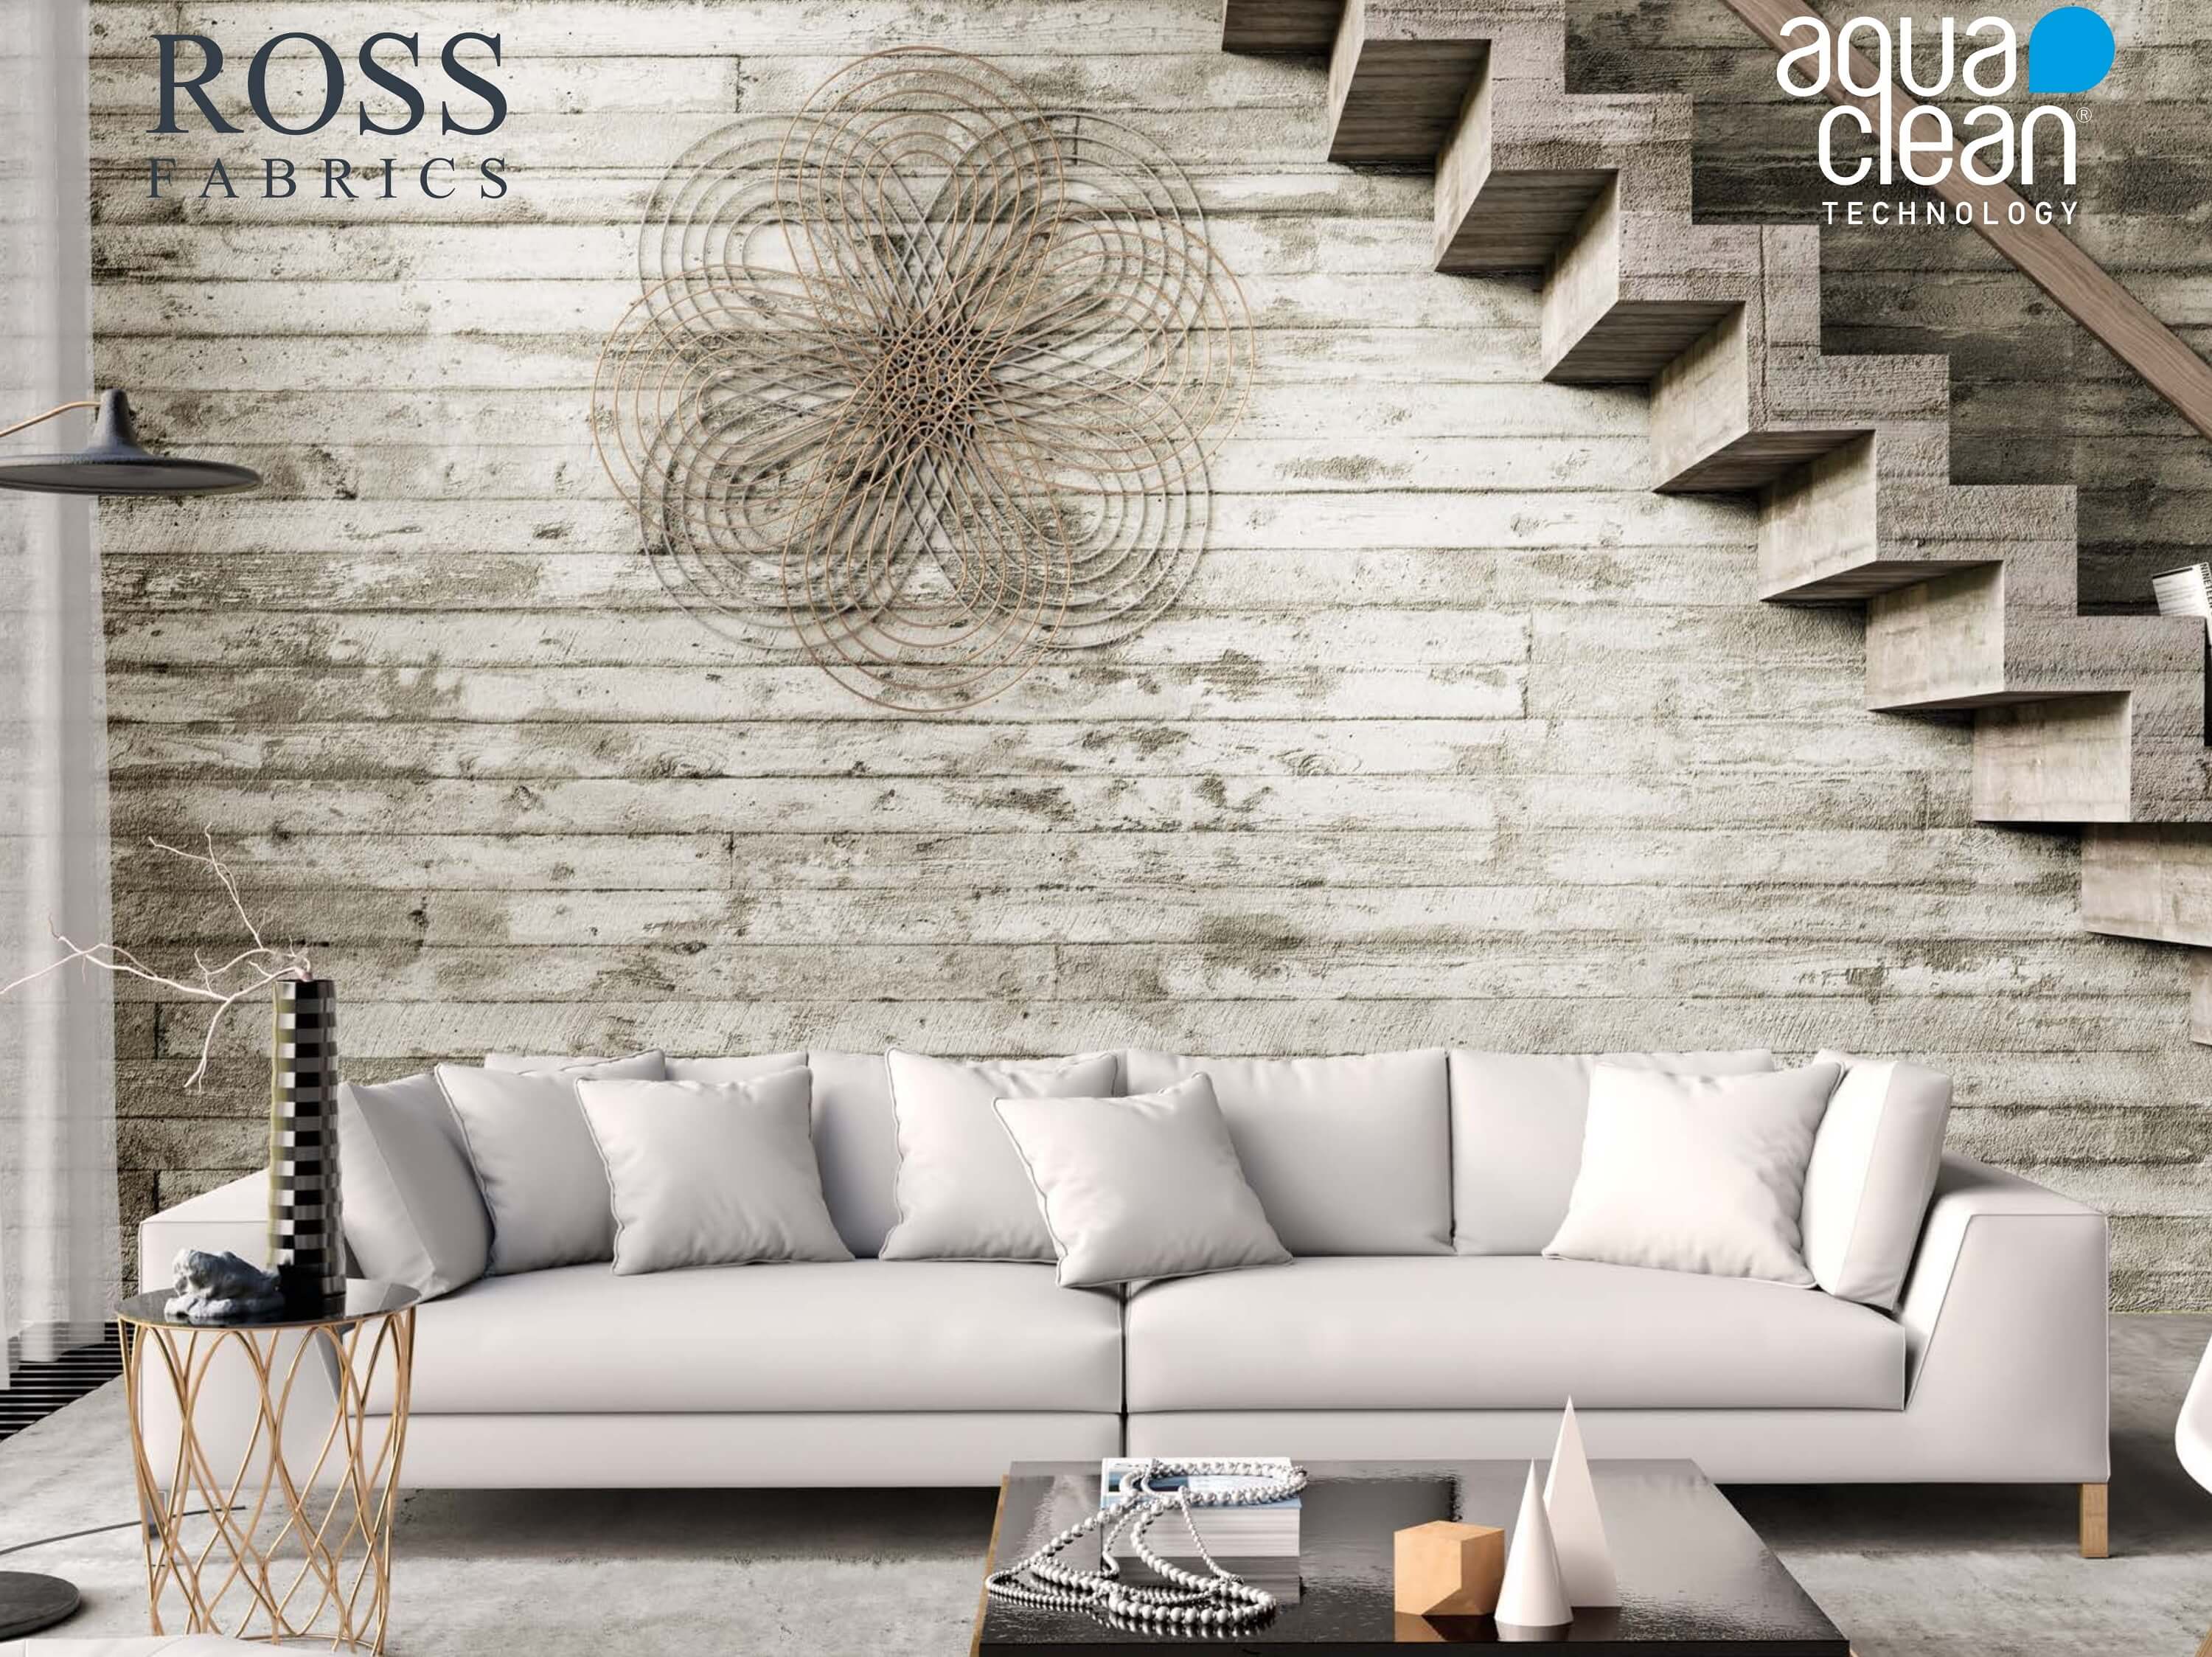 Ross Fabrics - A leading supplier of Upholstery Fabrics to the